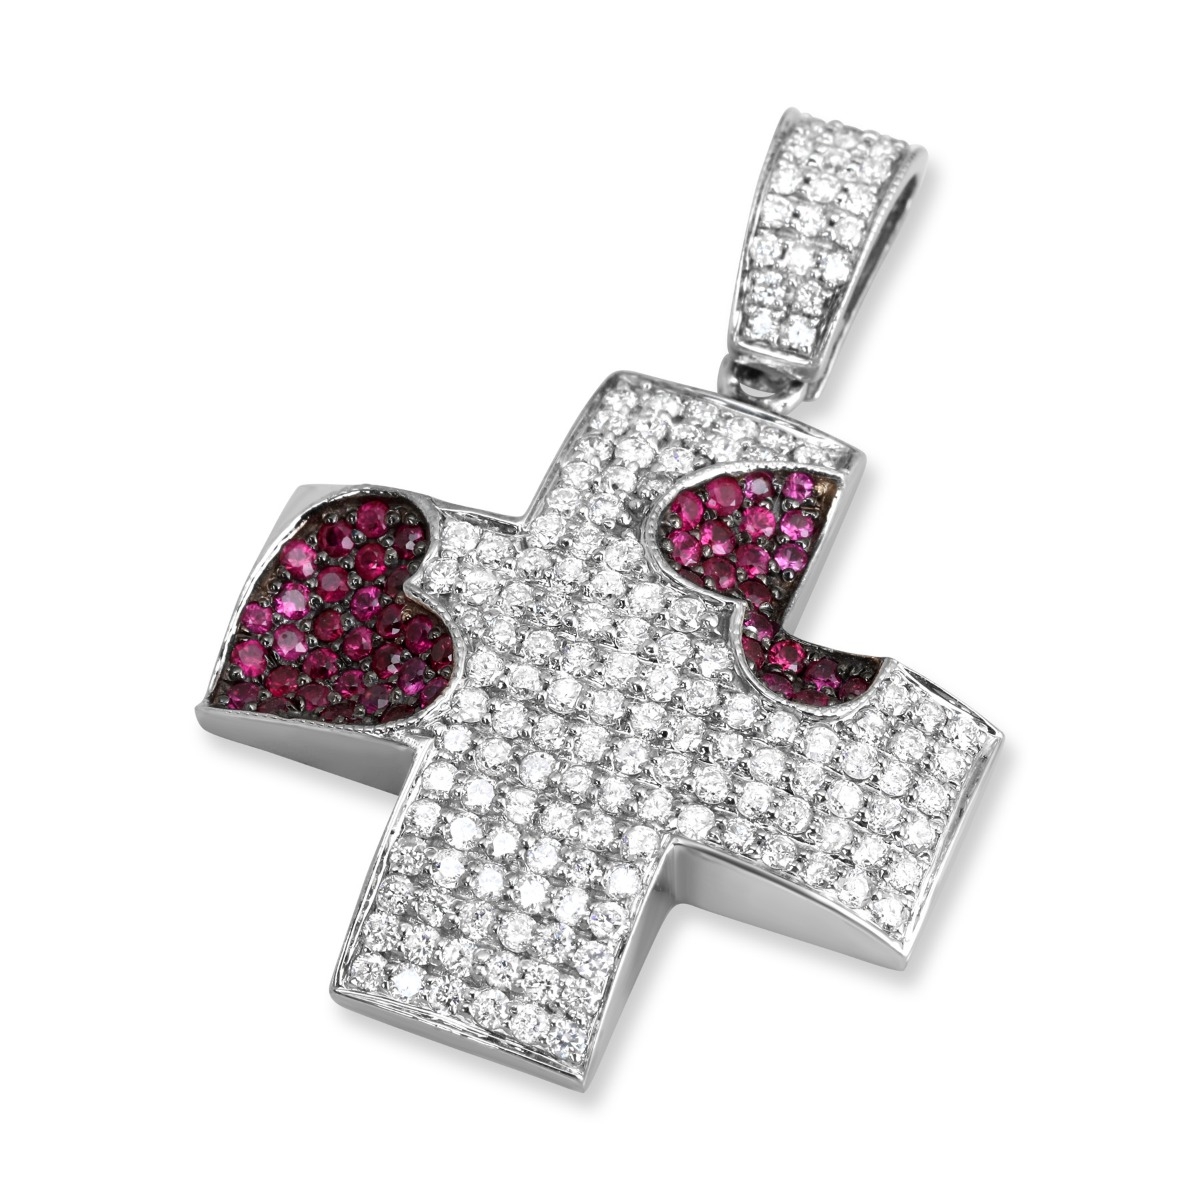 Anbinder Jewelry 14K White Gold Diamond and Ruby Pavé Hearts Greek Cross Pendant with 208 Gemstones - 1